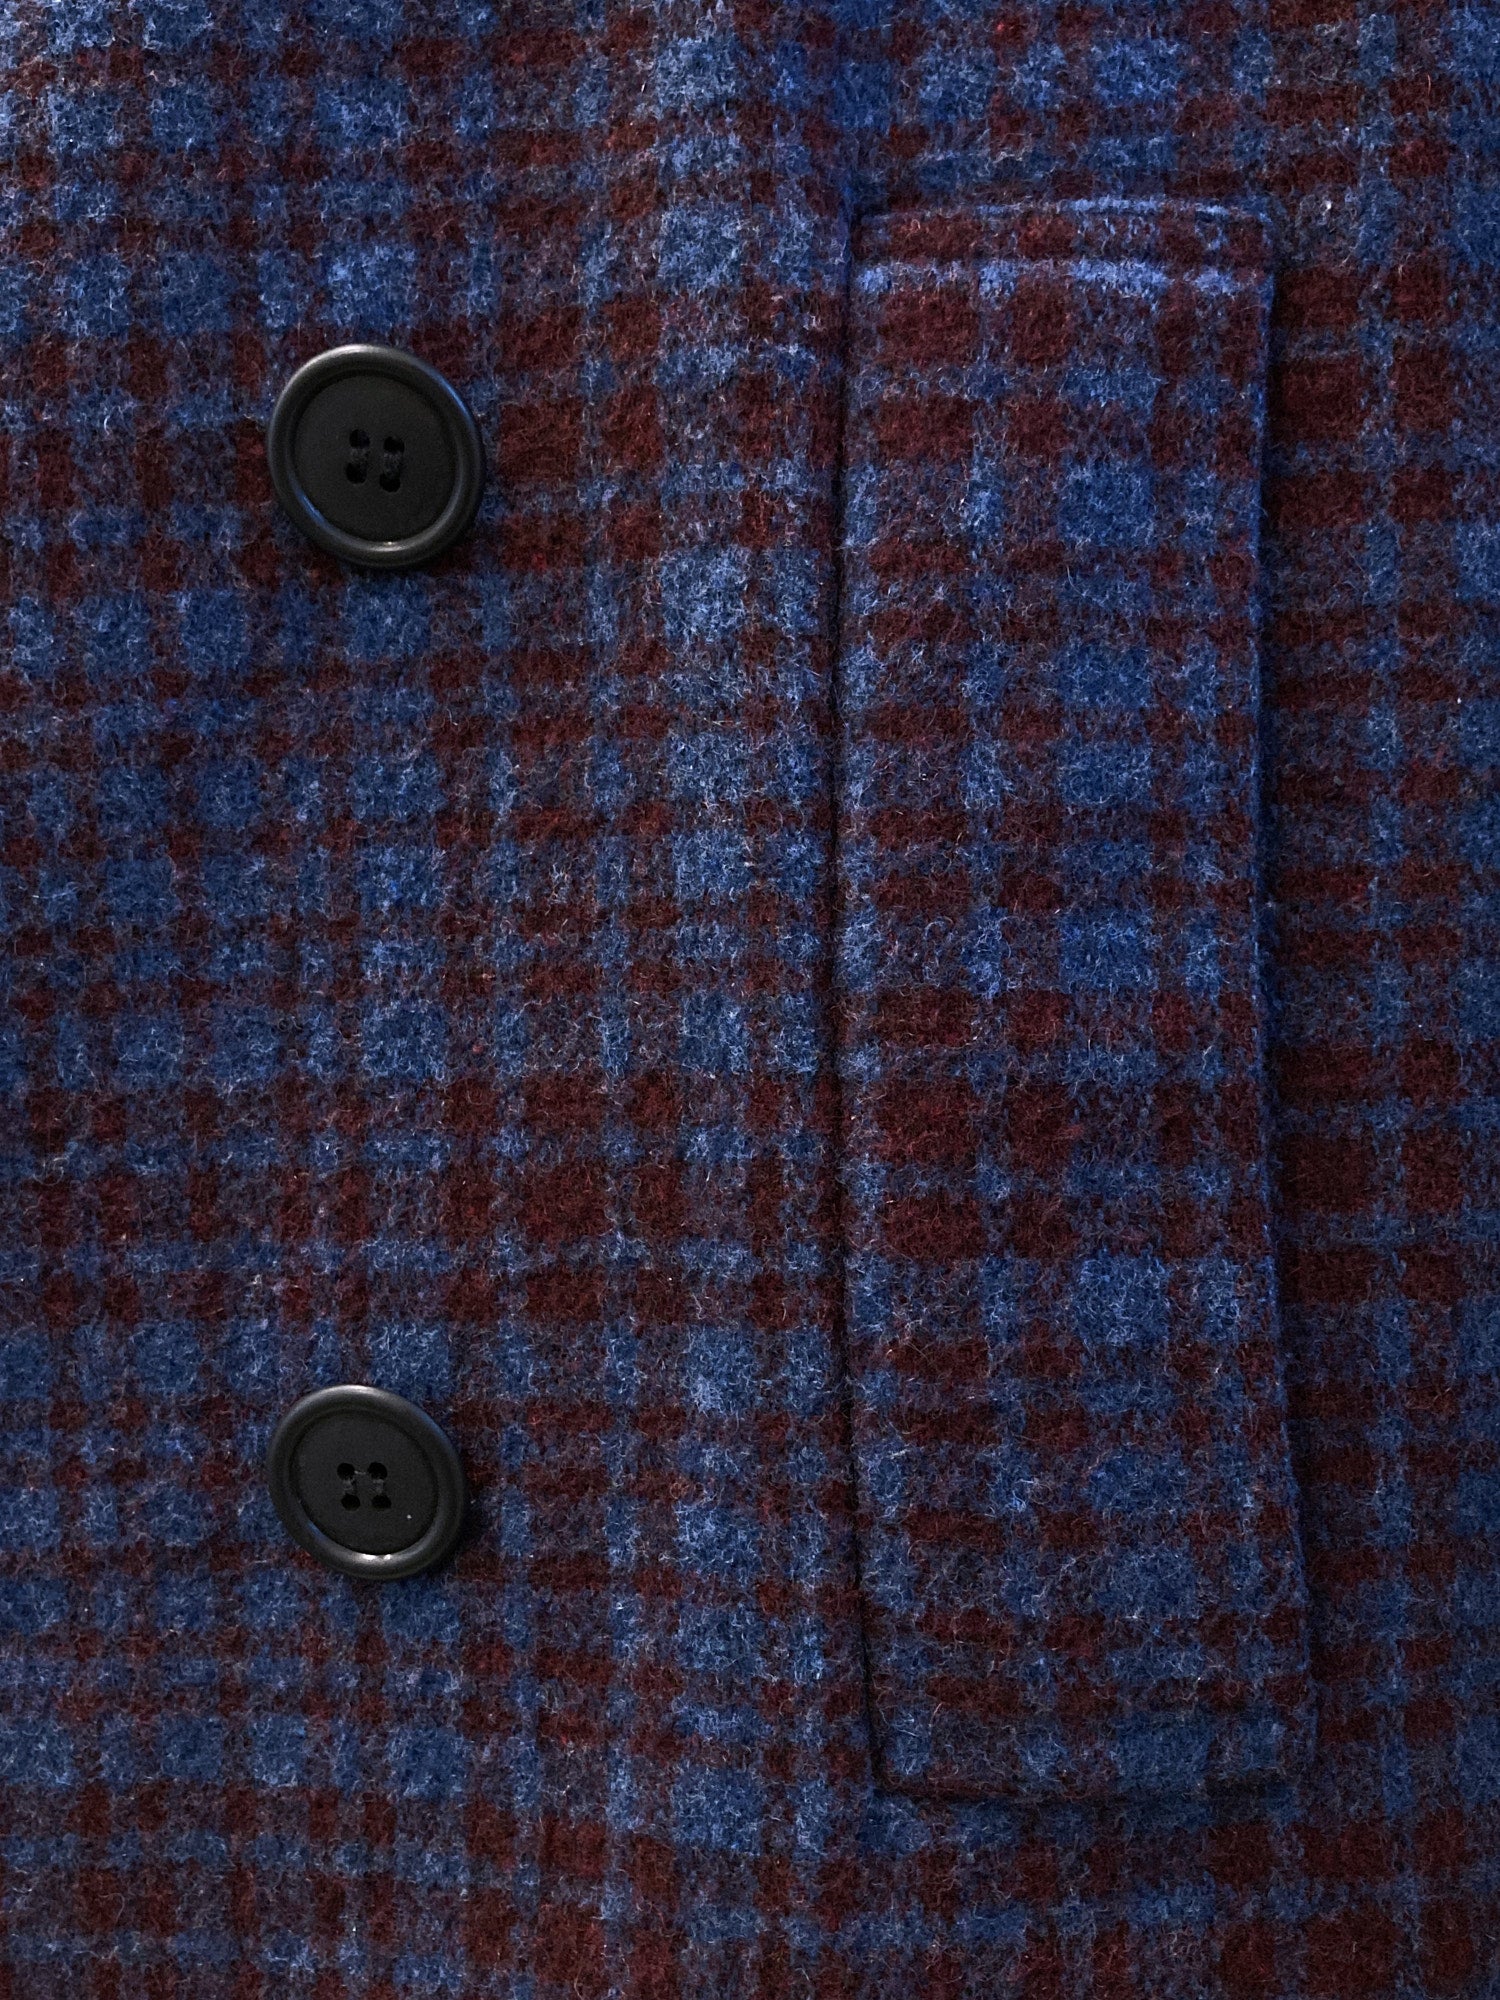 Jean Colonna purple blue check knit pea coat with overlocked edges - S